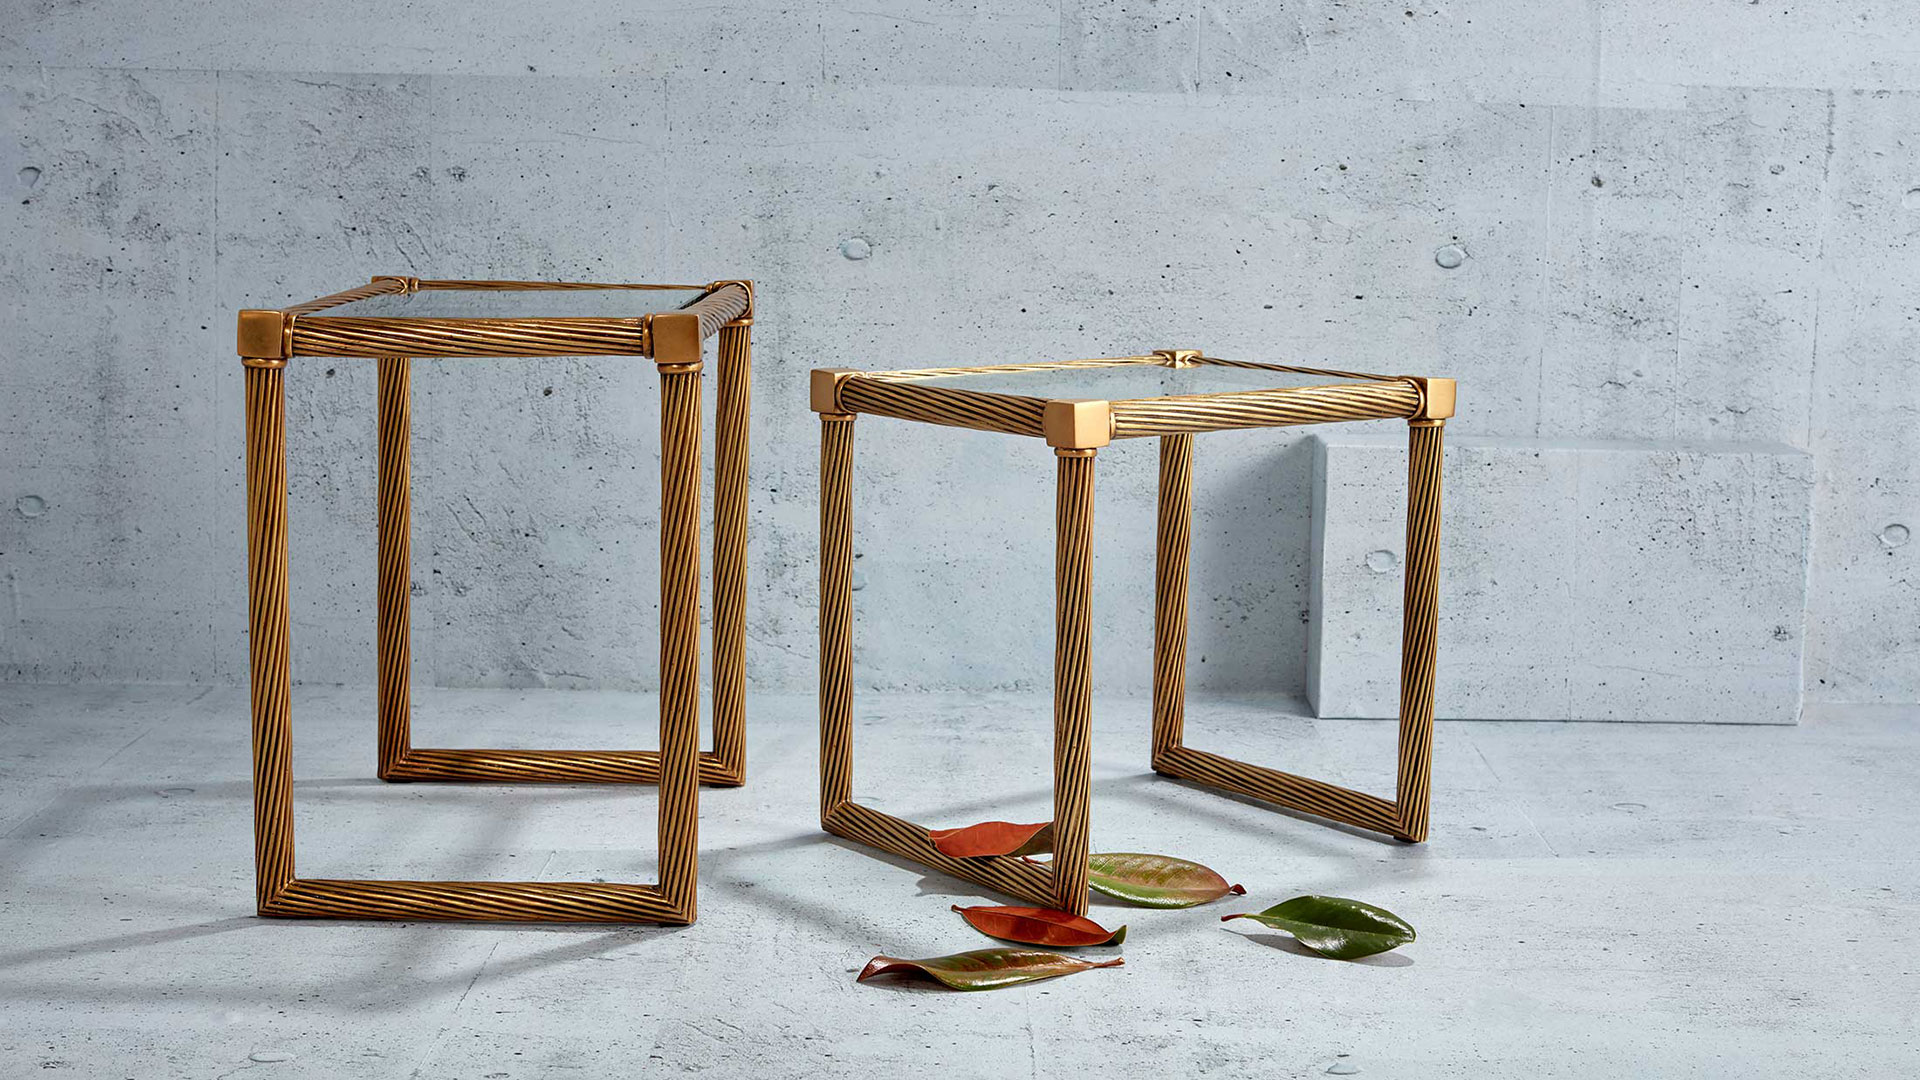 Mirror stacking side tables with concrete background photographed by professional editorial product photographer Kate Benson.